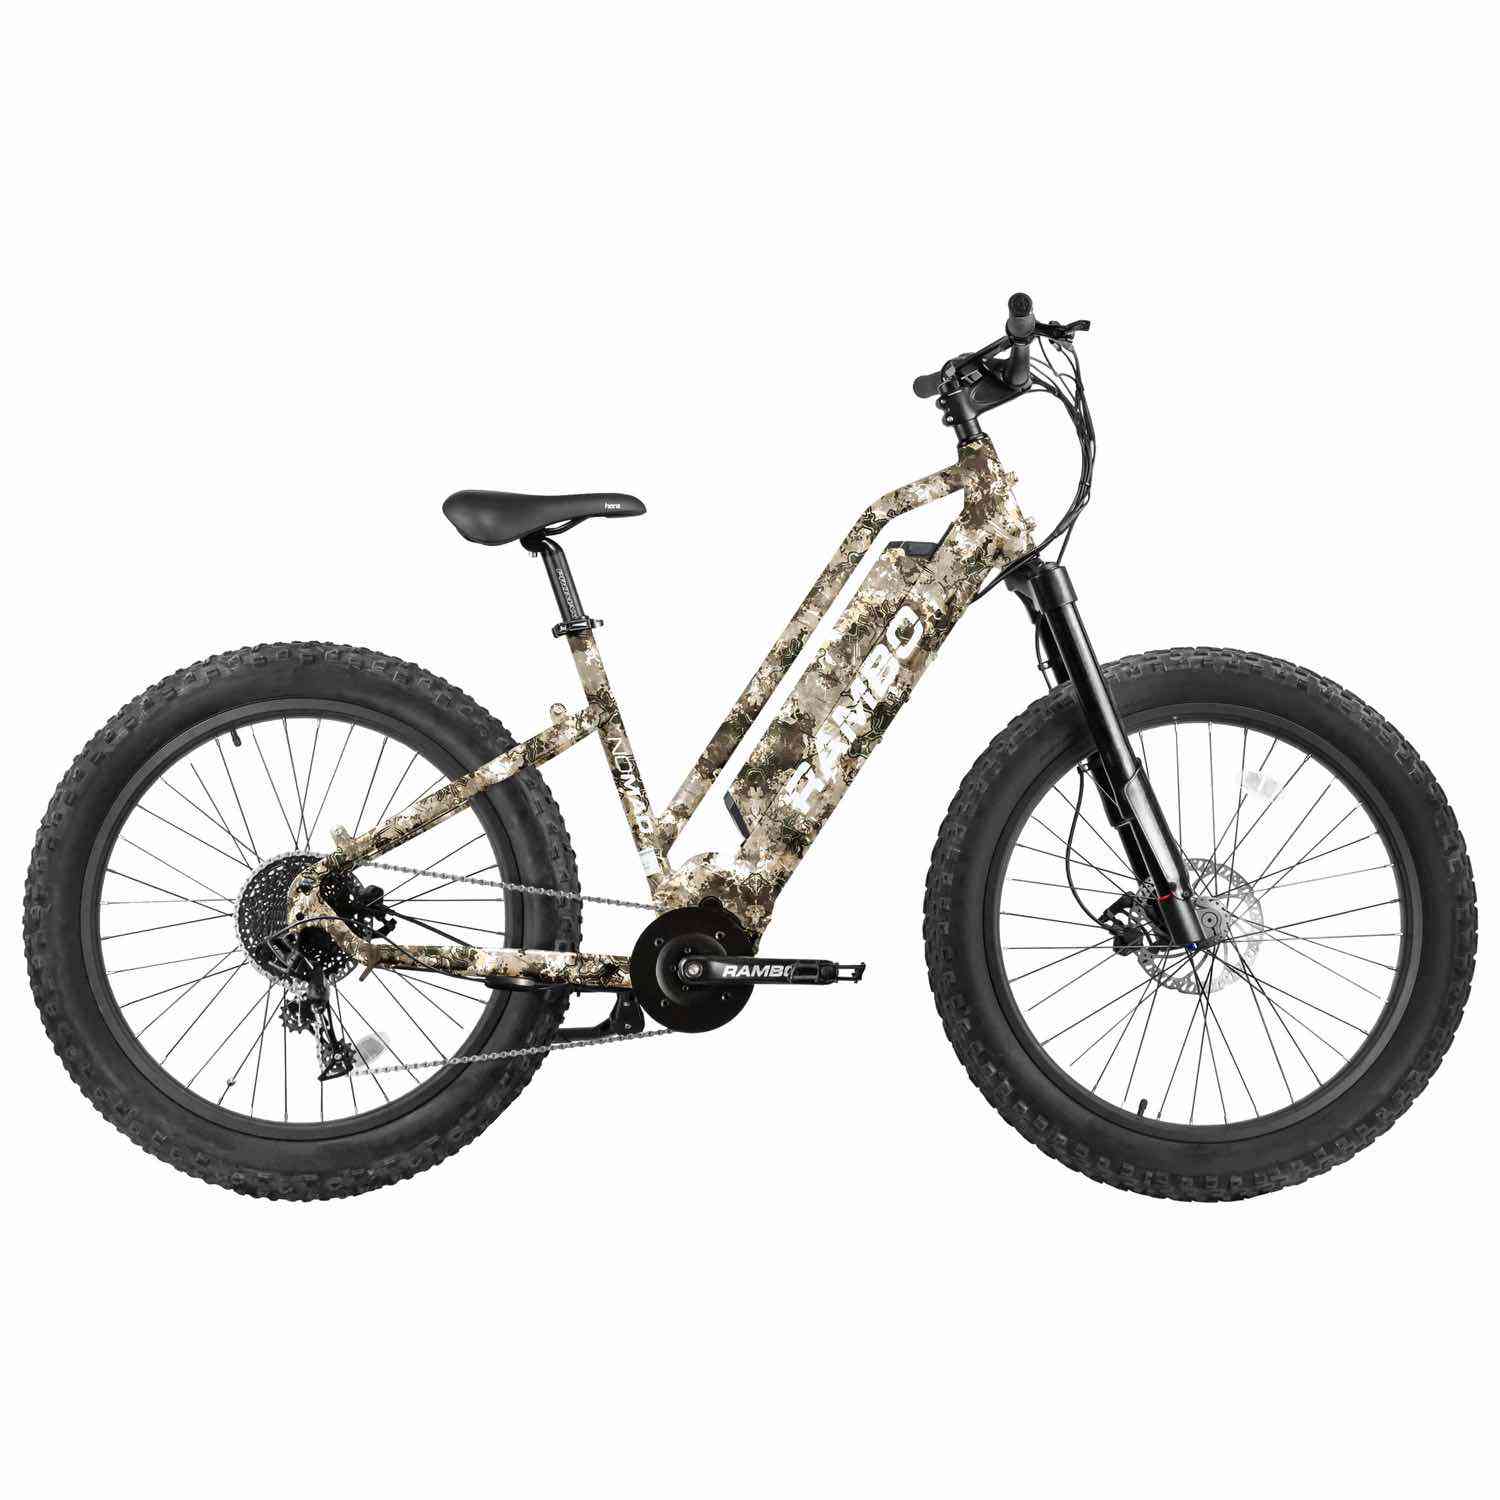 2022 Rambo NOMAD STEP THROUGH 750 XPST Mid Drive Fat Tire Electric Bike - Upzy.com